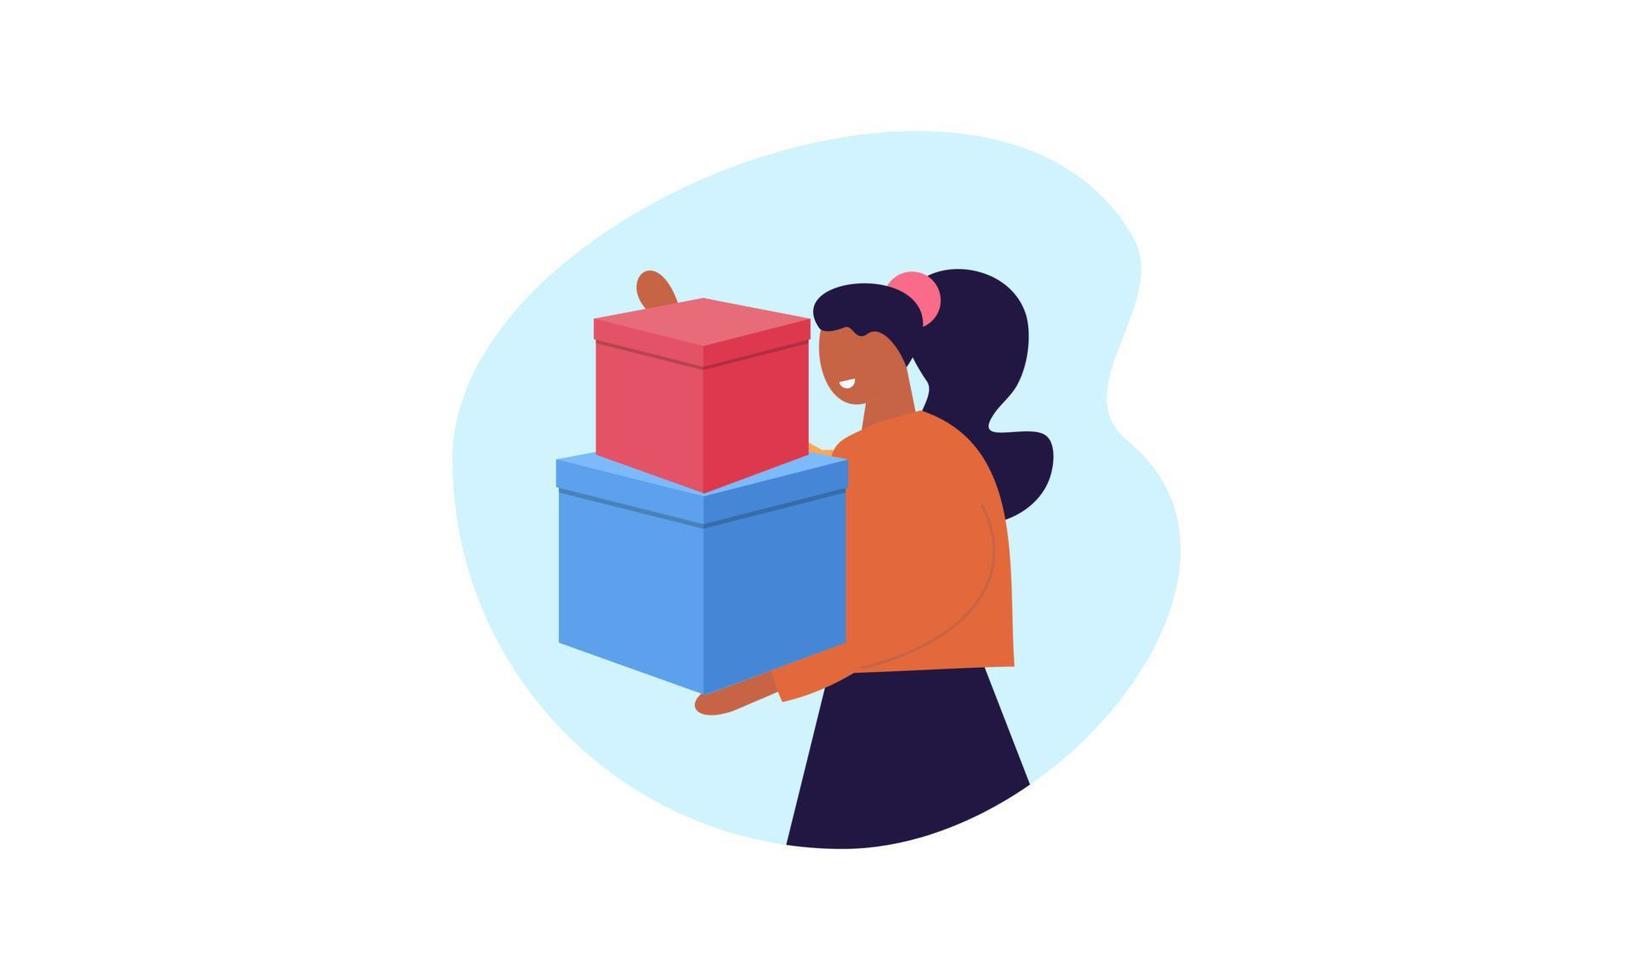 Big sale with girl holding boxes illustration vector